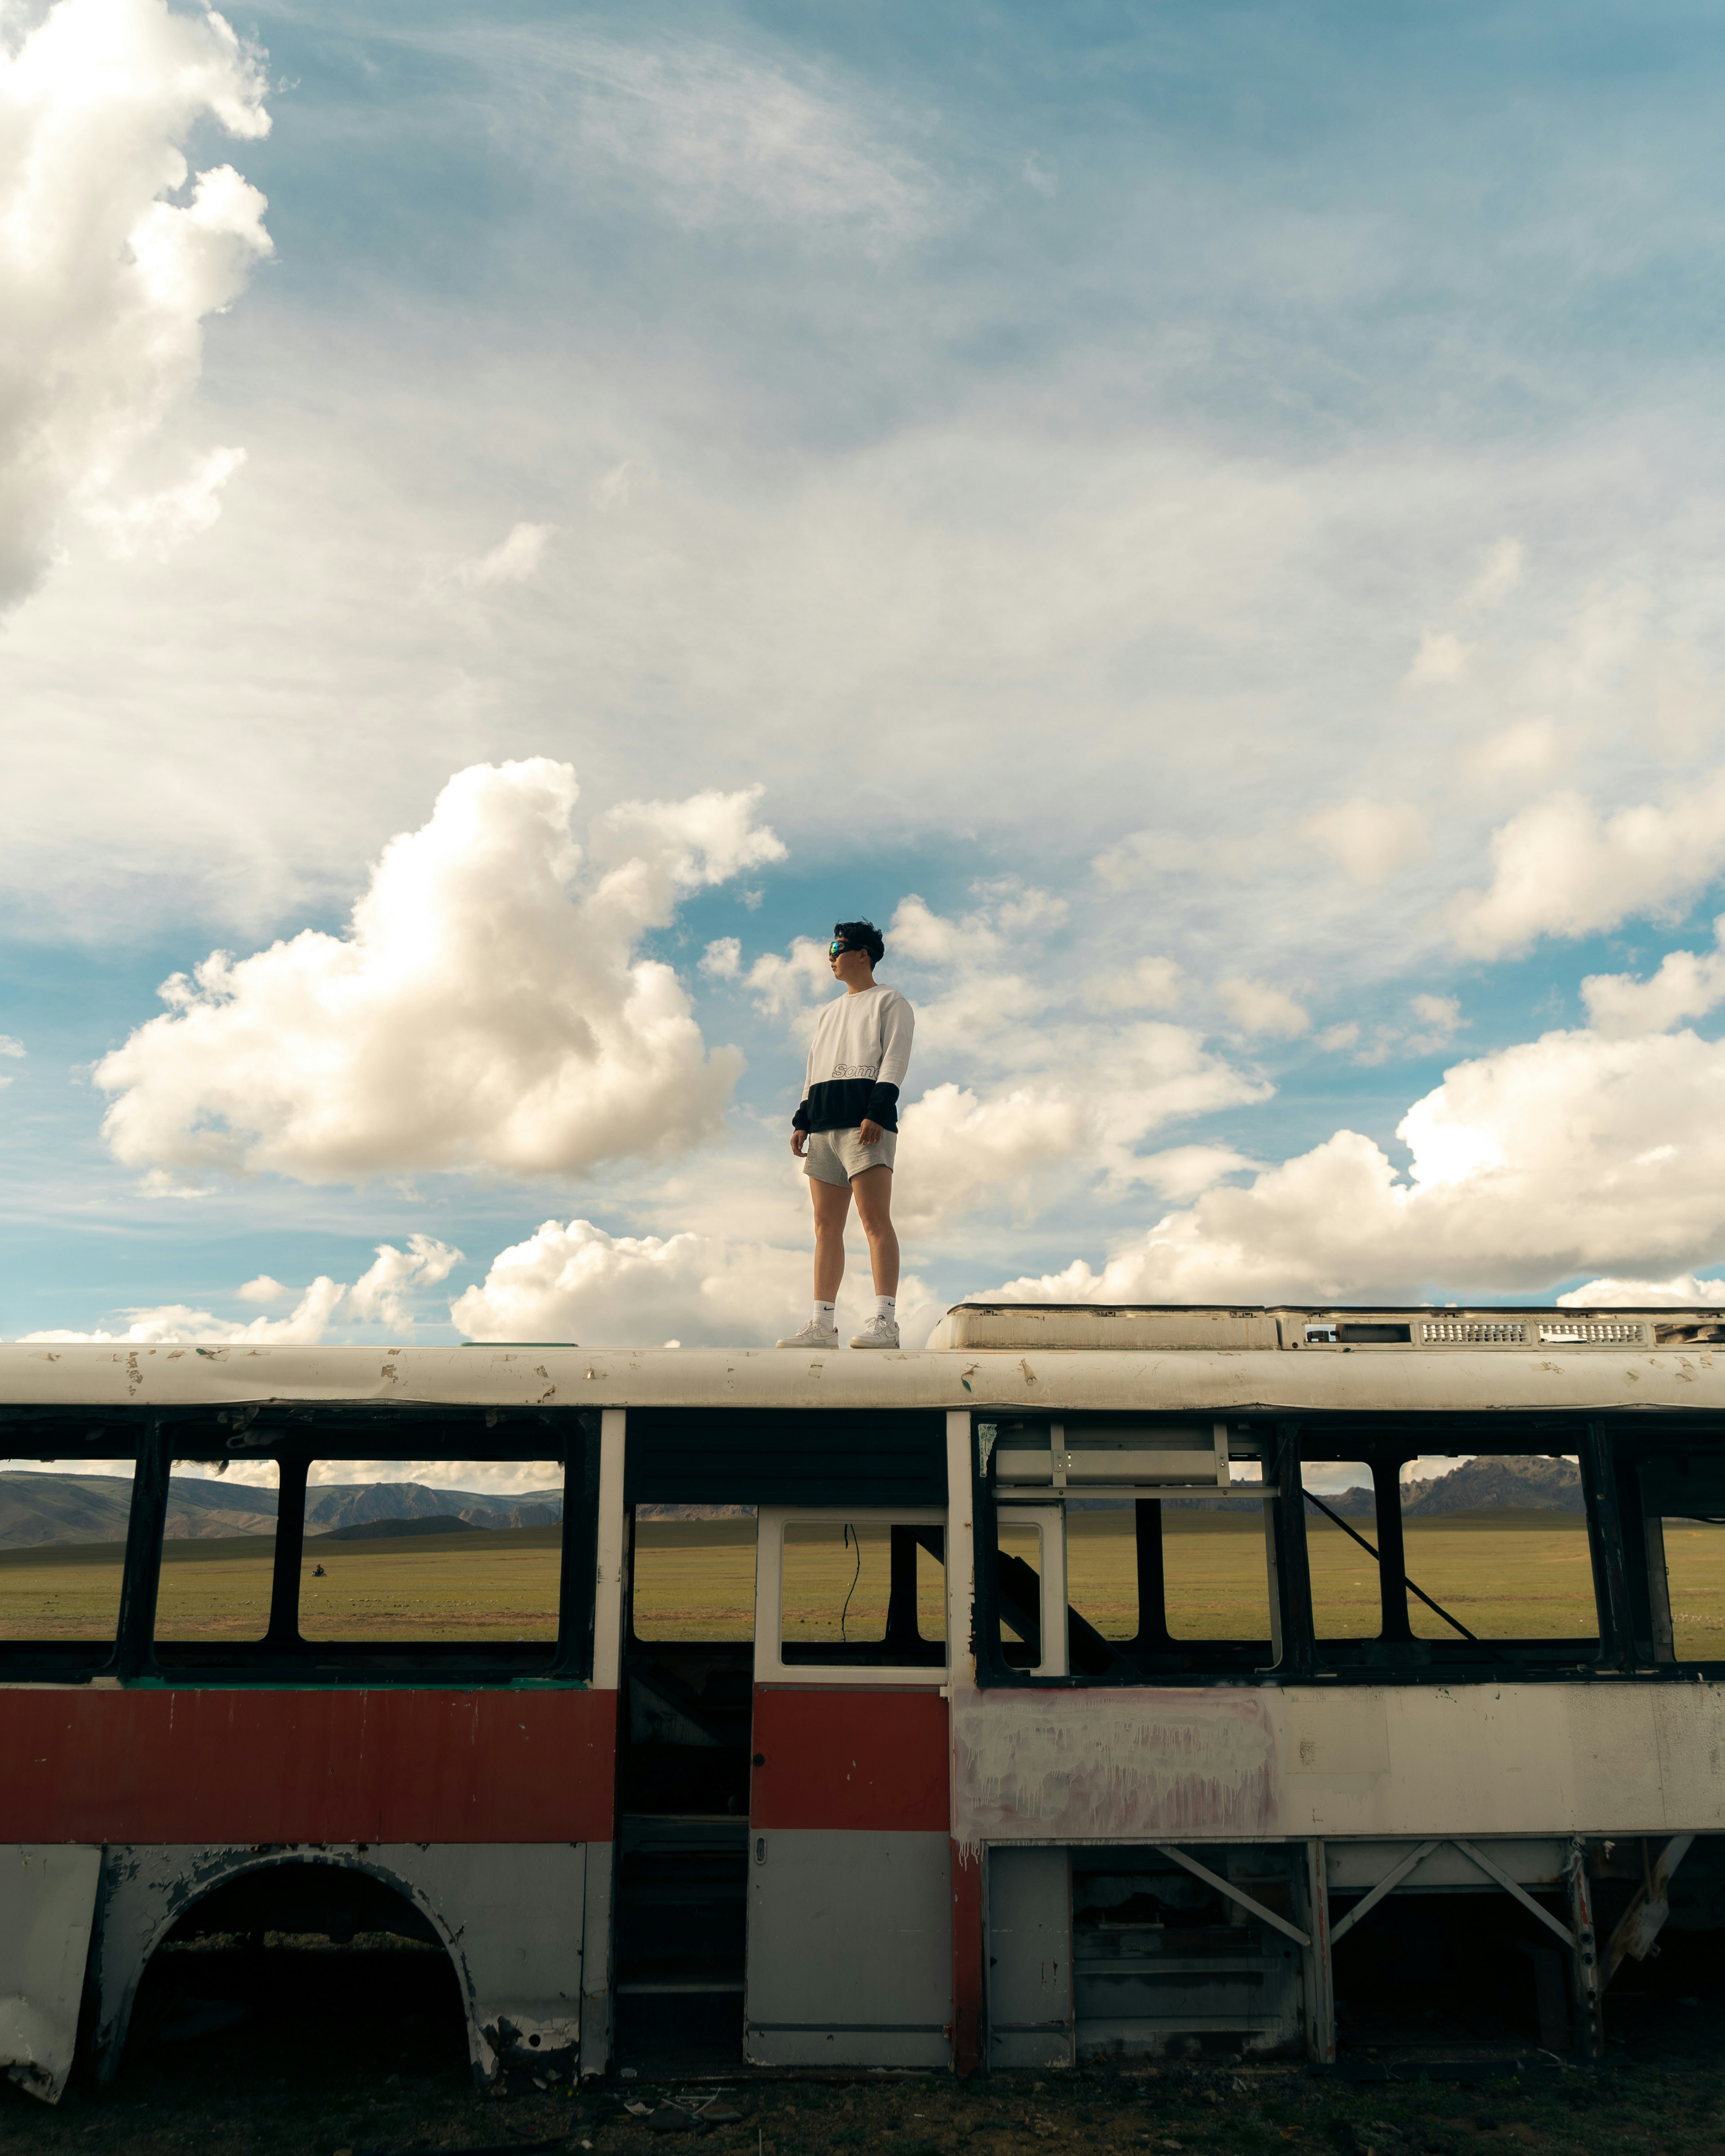 woman in white shirt and black shorts standing on red and white bus under white clouds